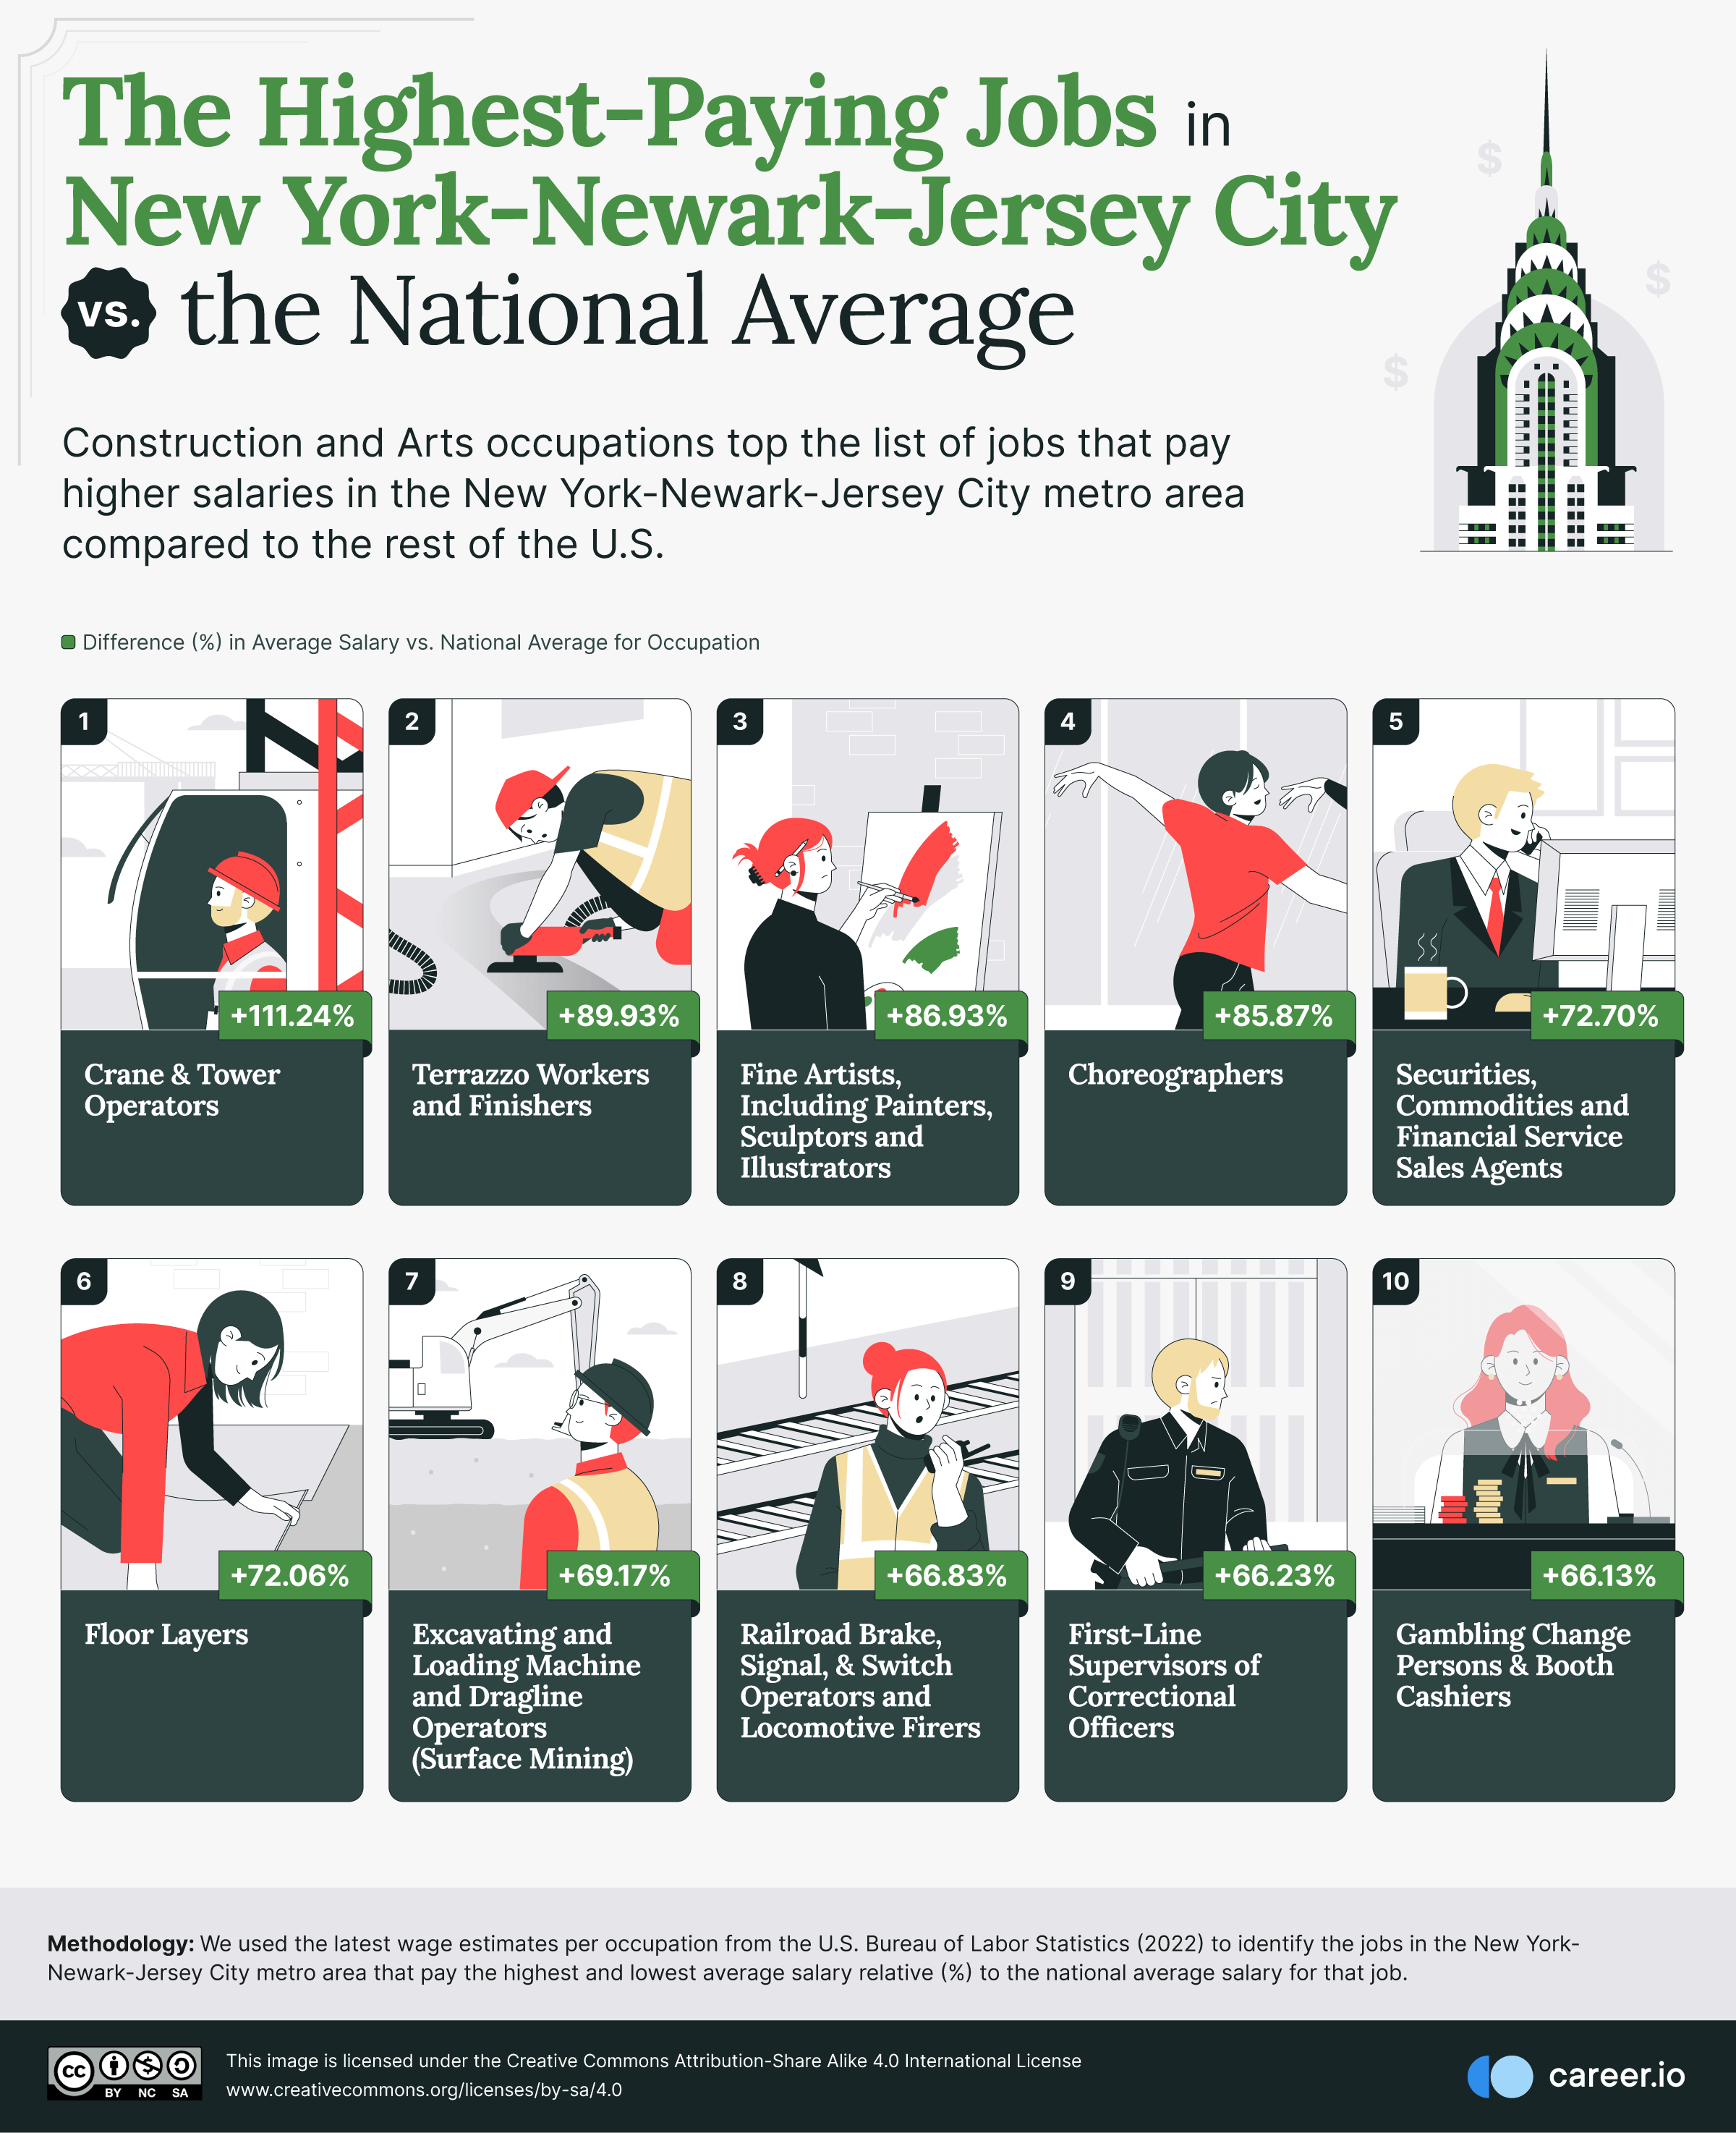 04-Highest-Paying-Job-in-NY-NEW-JC-vs-the-National-Average